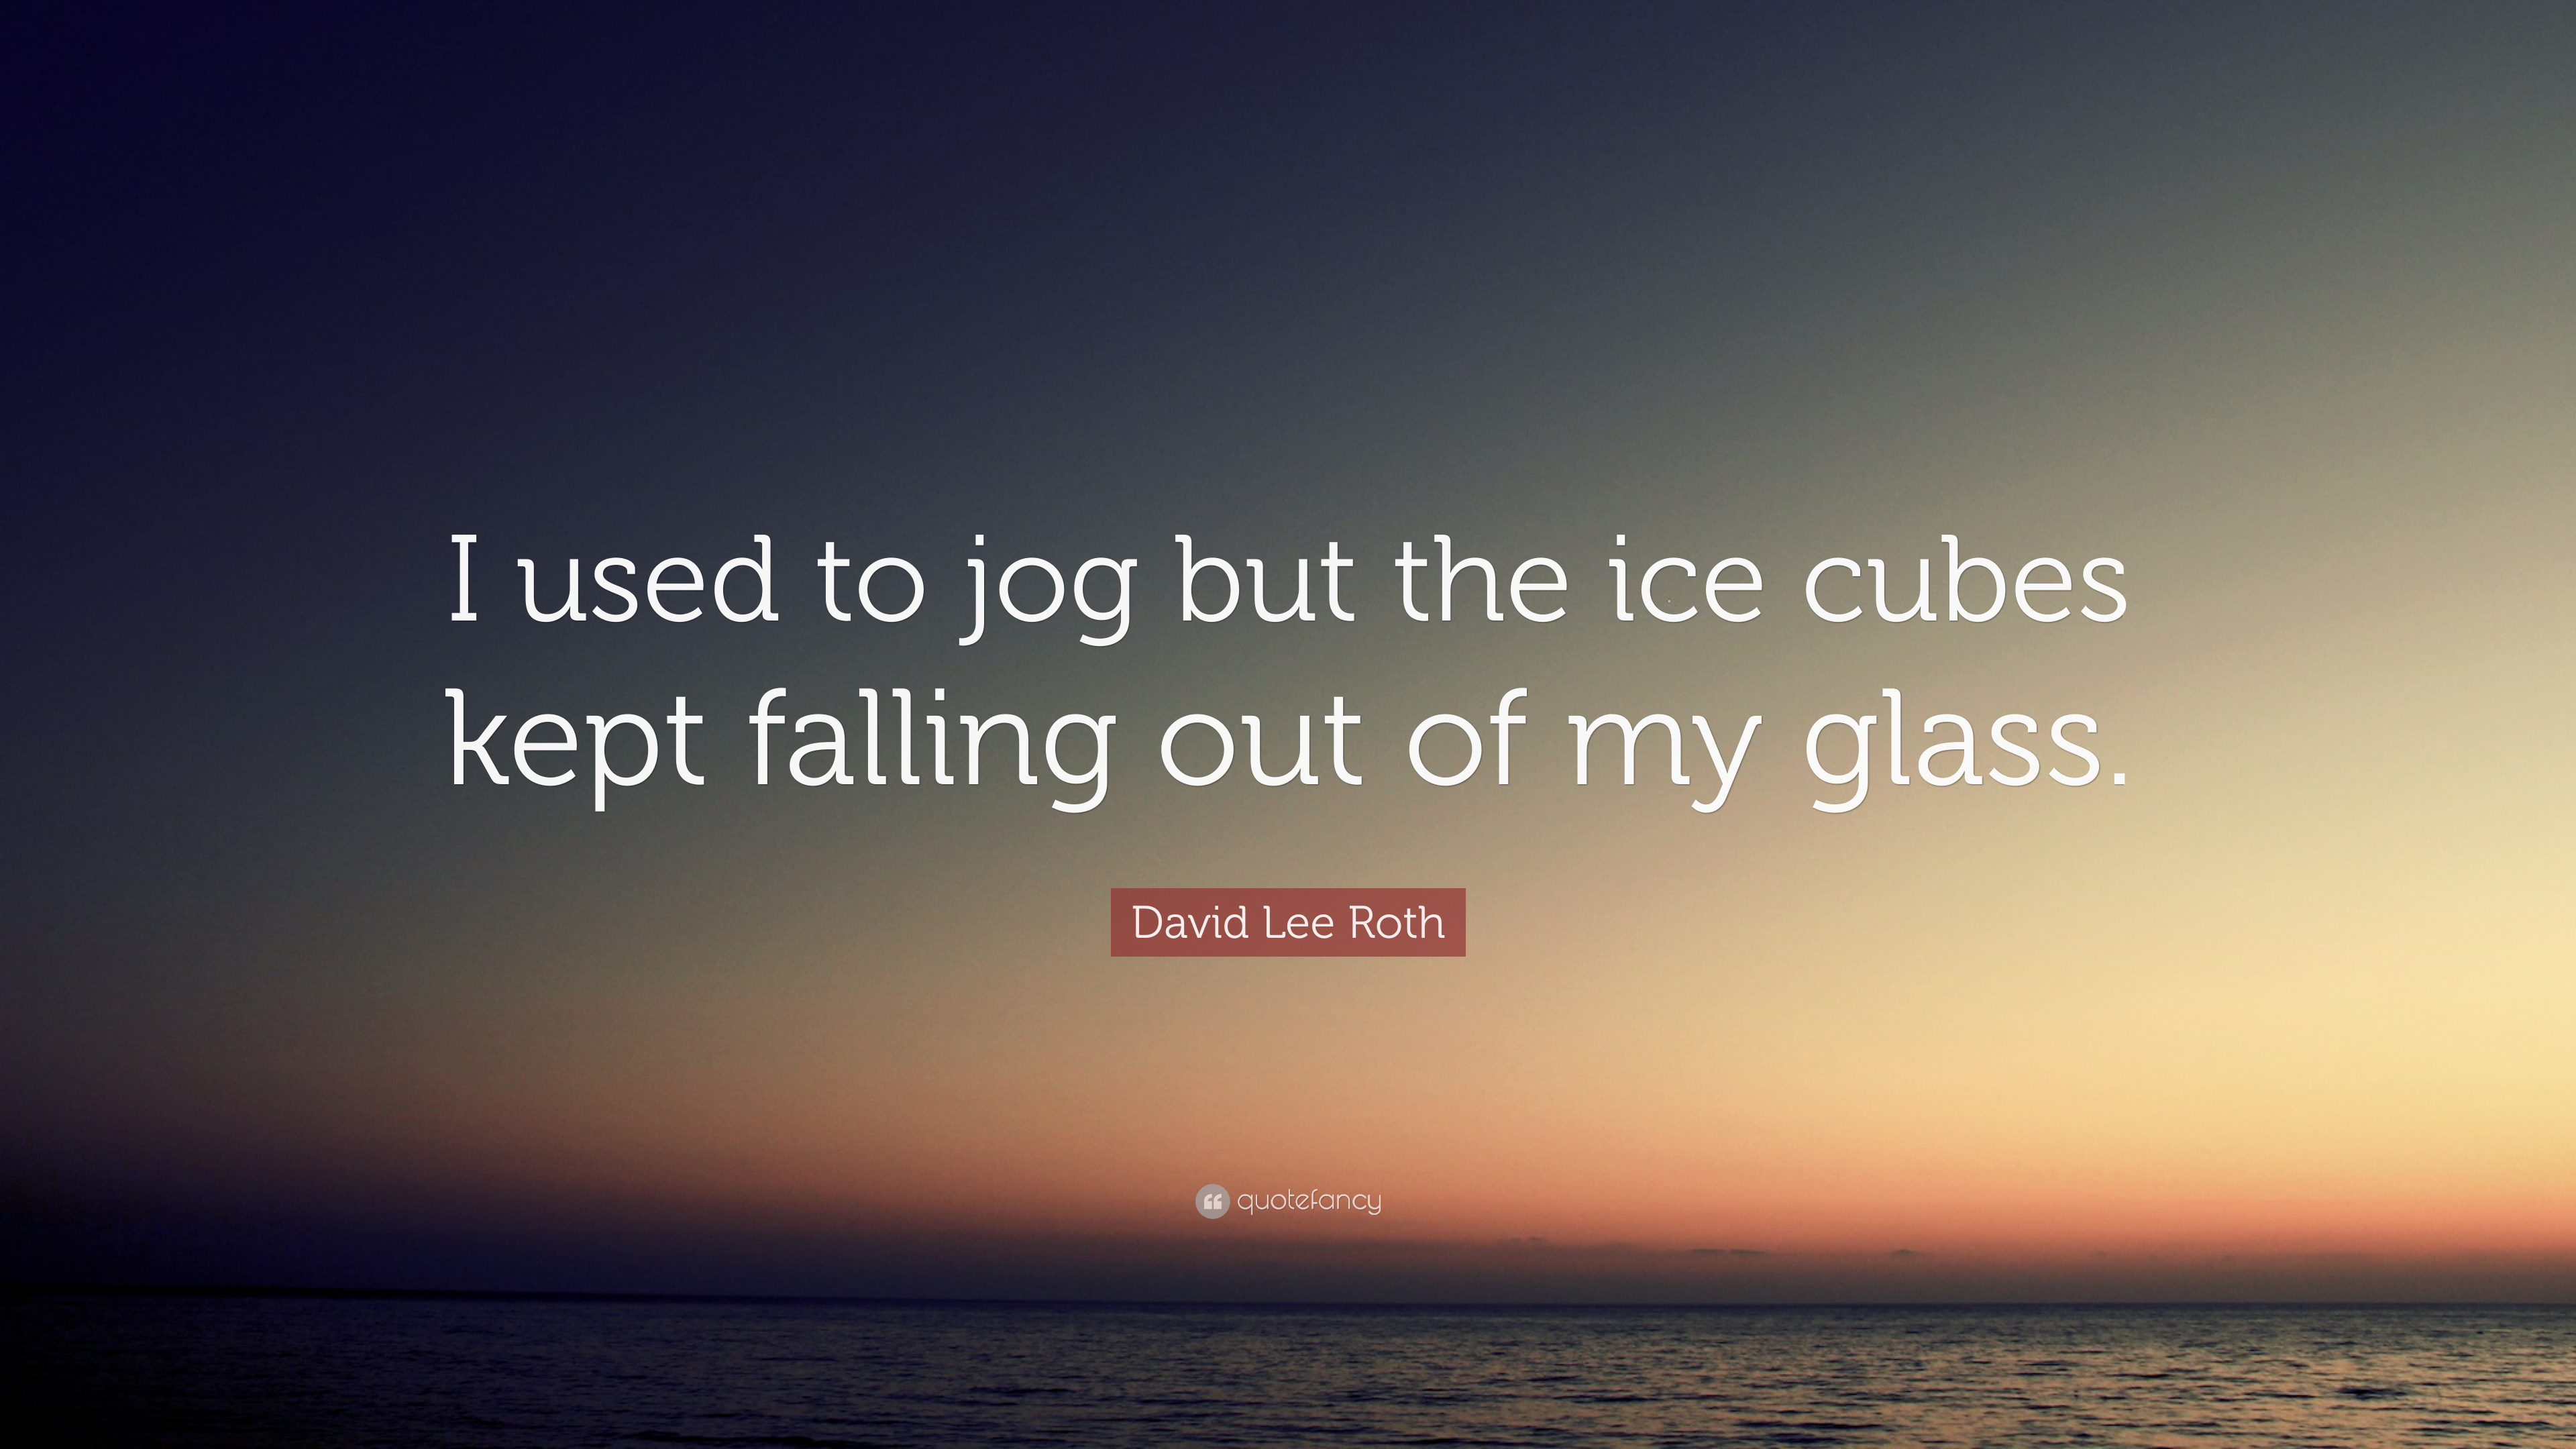 8 Quotes About David Lee Roth